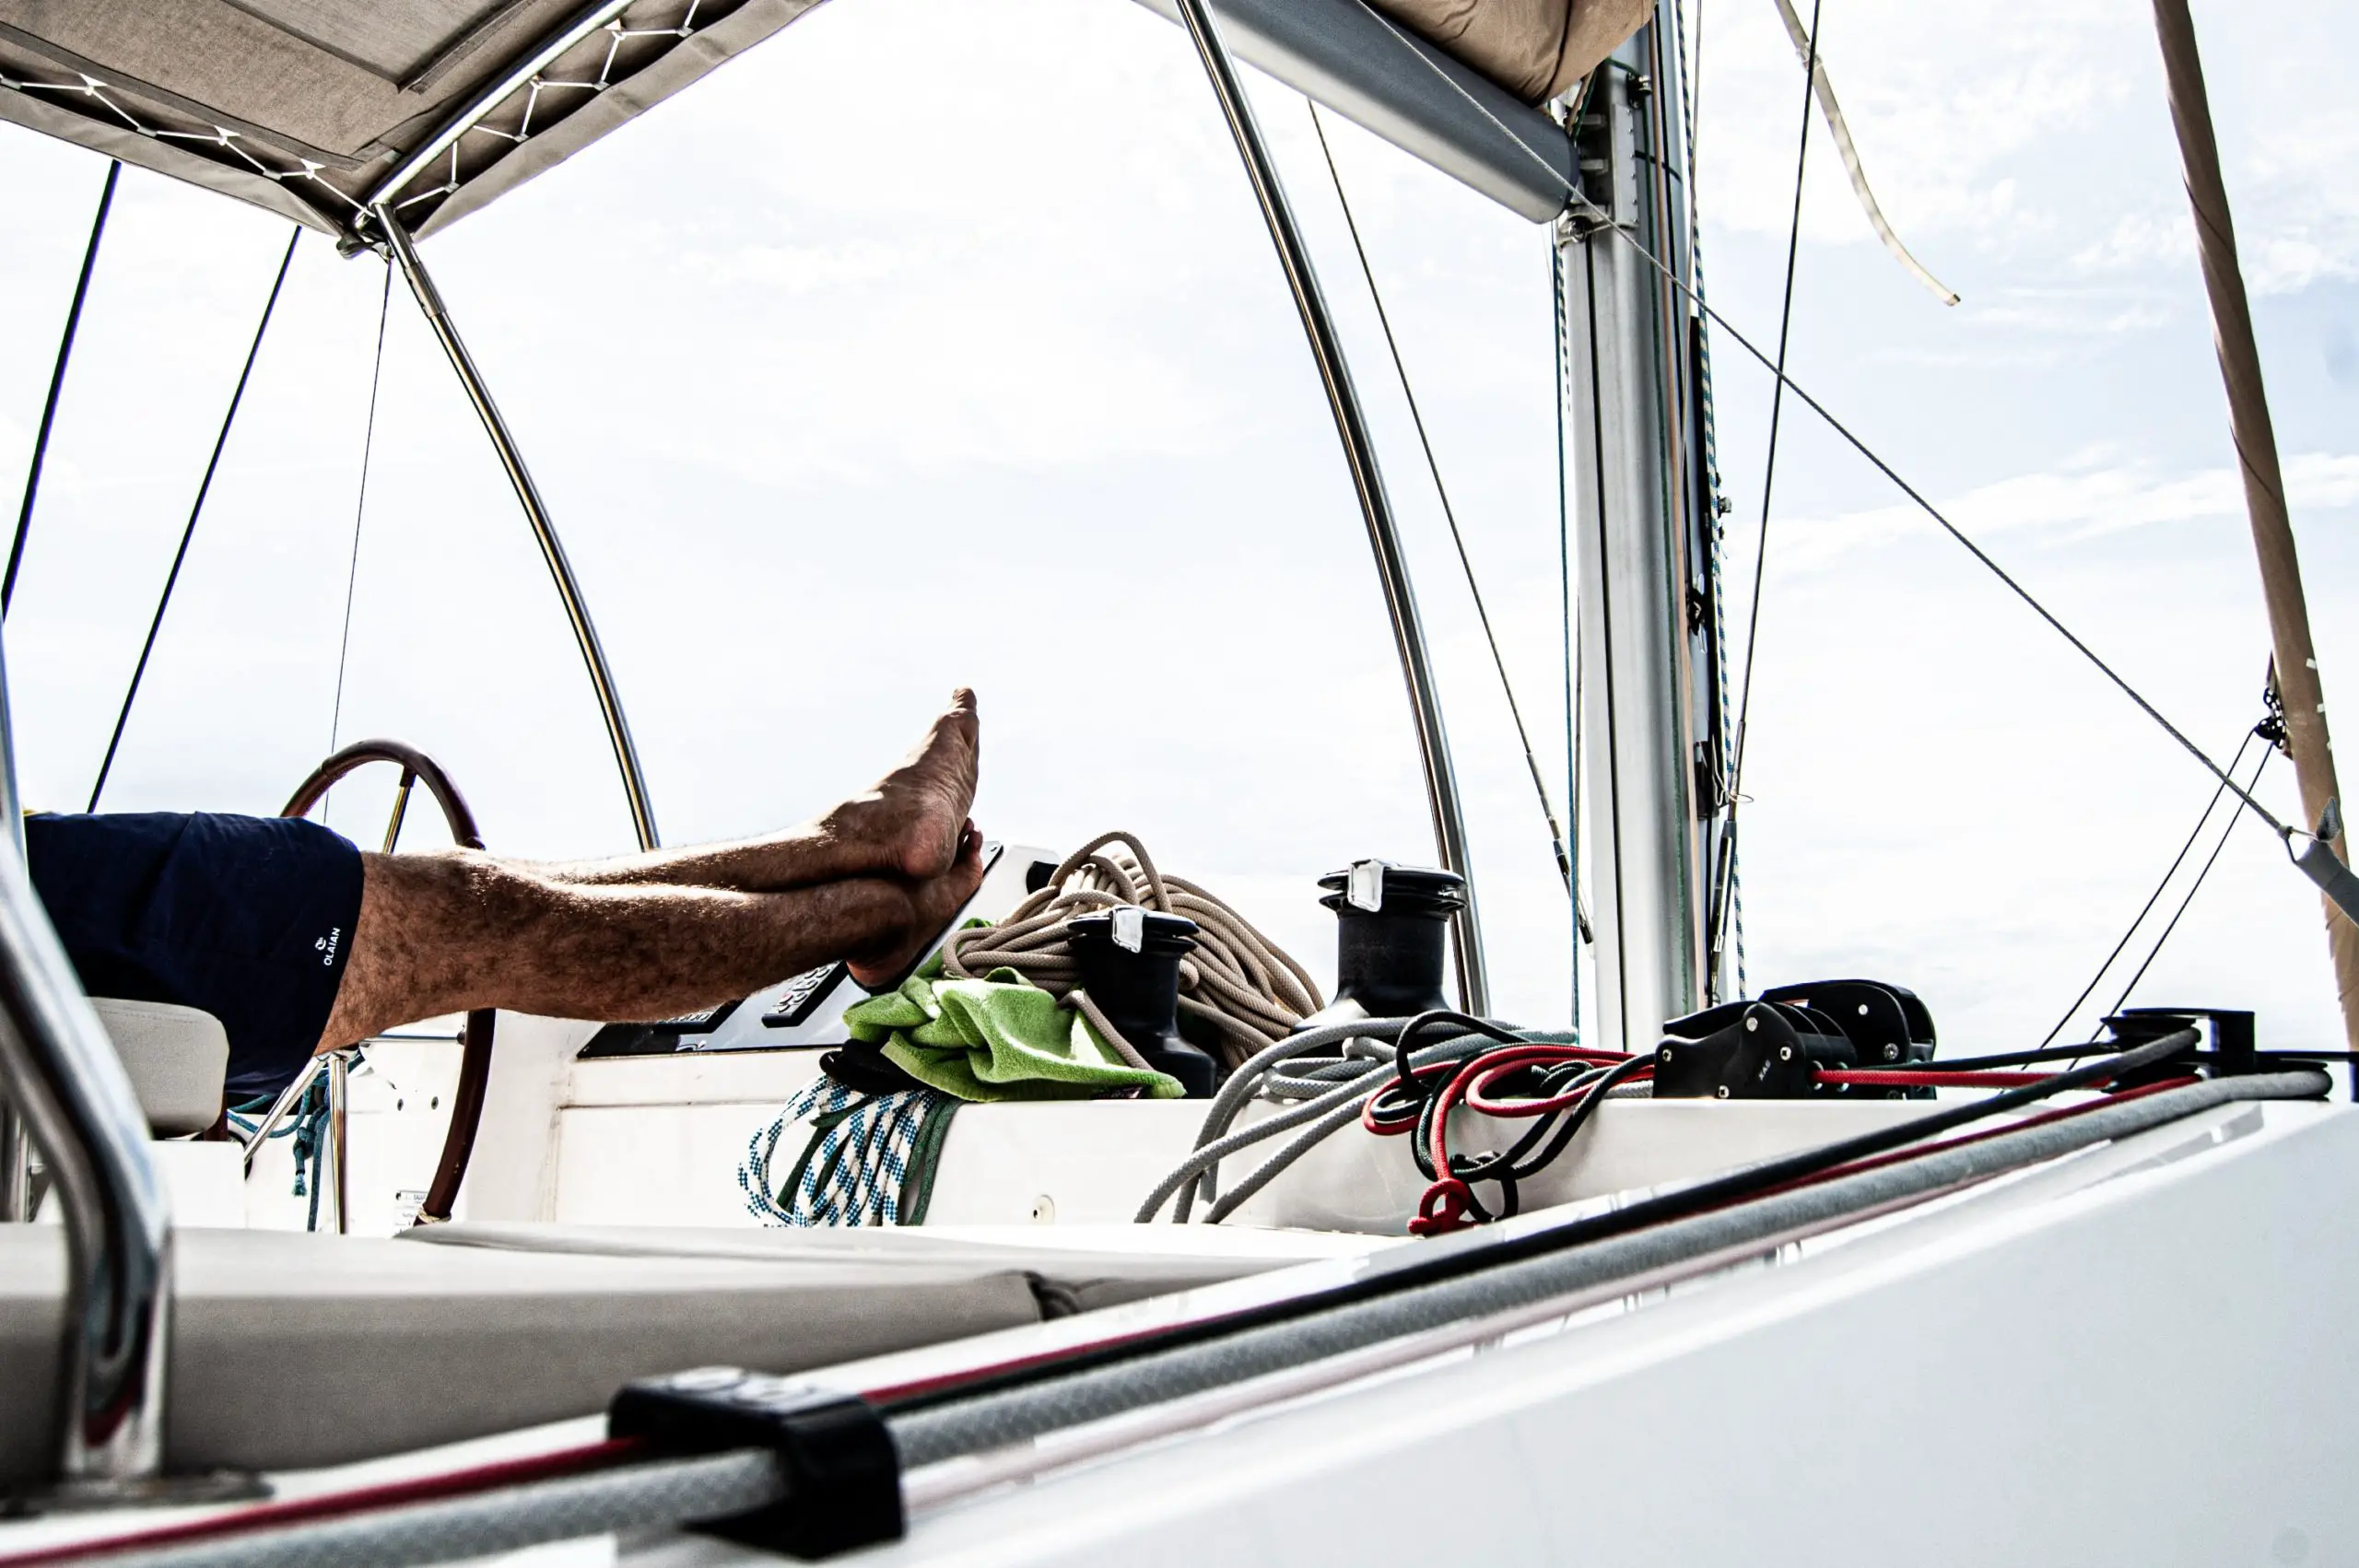 How to choose the best winch for your sailboat?